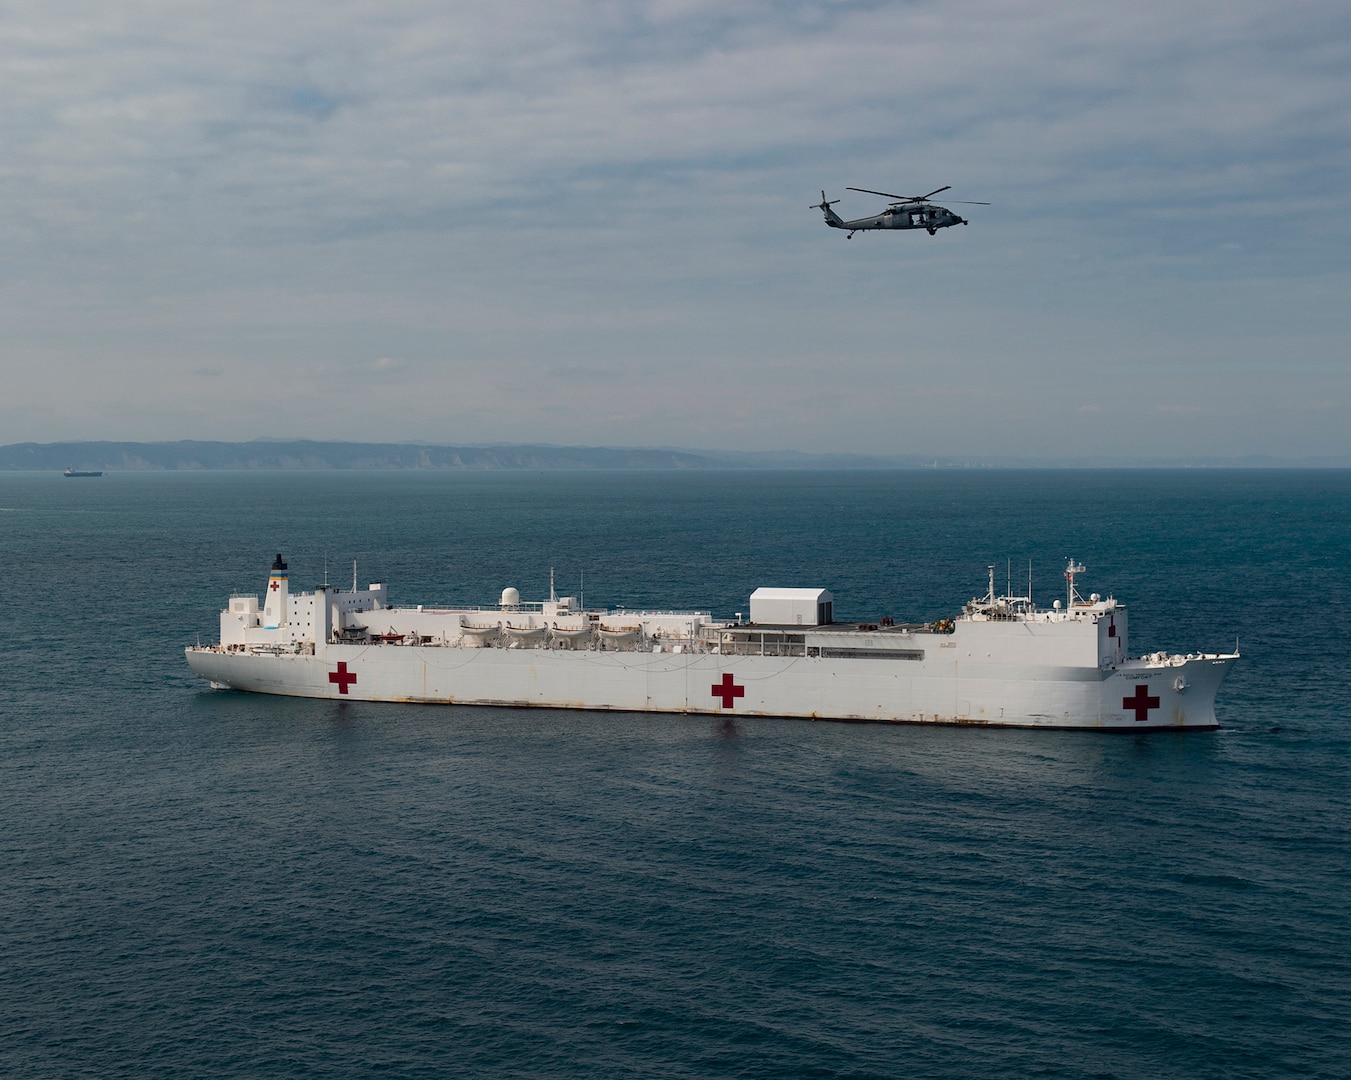 The hospital ship USNS Comfort (T-AH 20) is stationed off the coast of Ecuador.